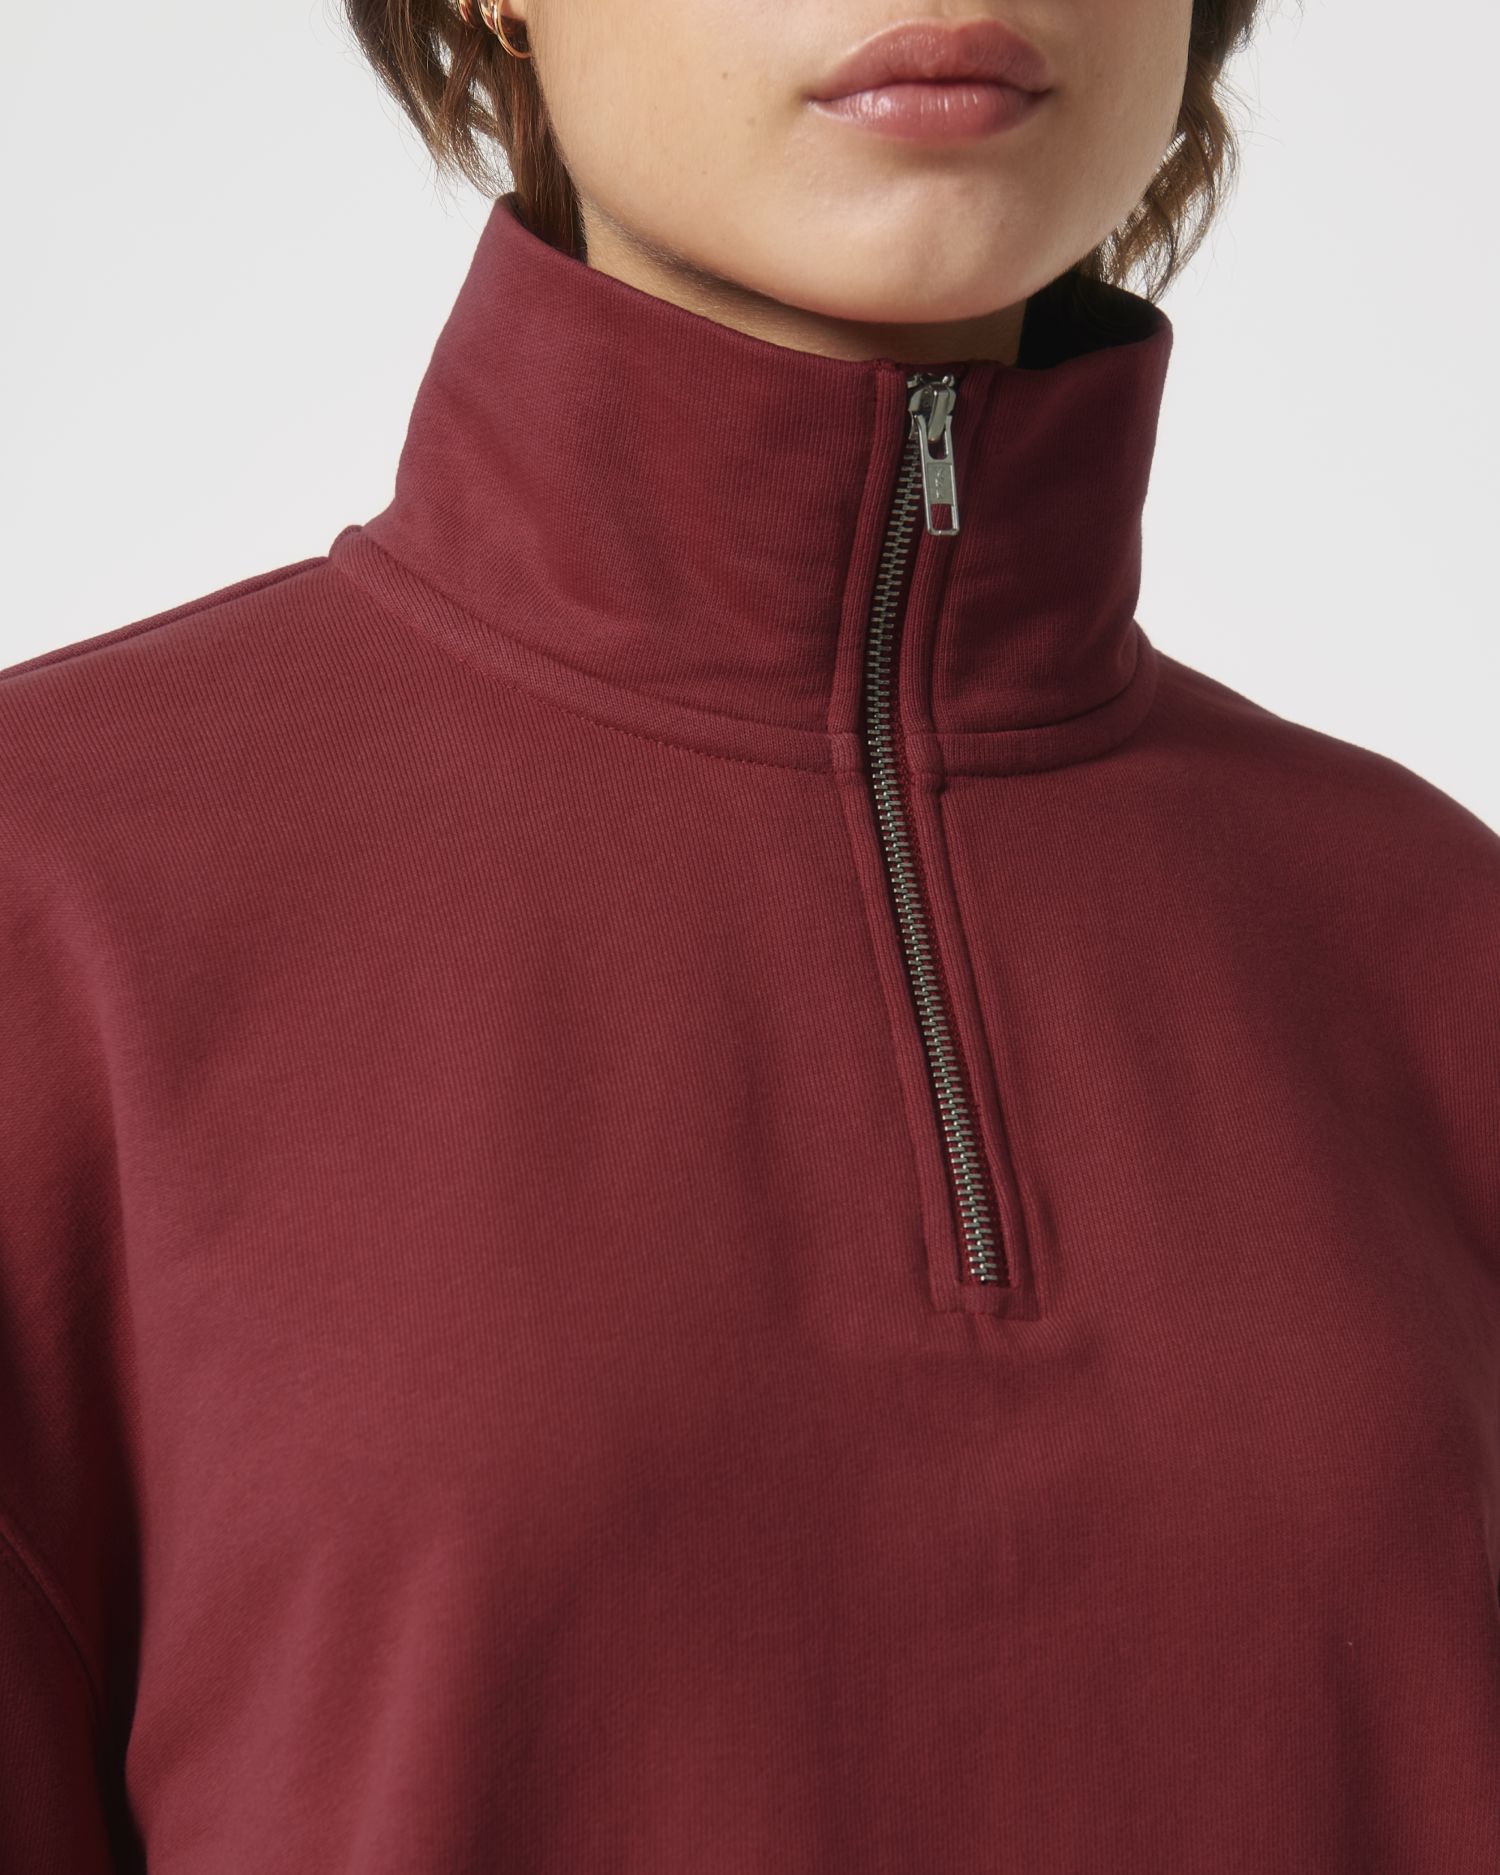 Crew neck sweatshirts Miller Dry in Farbe Red Earth